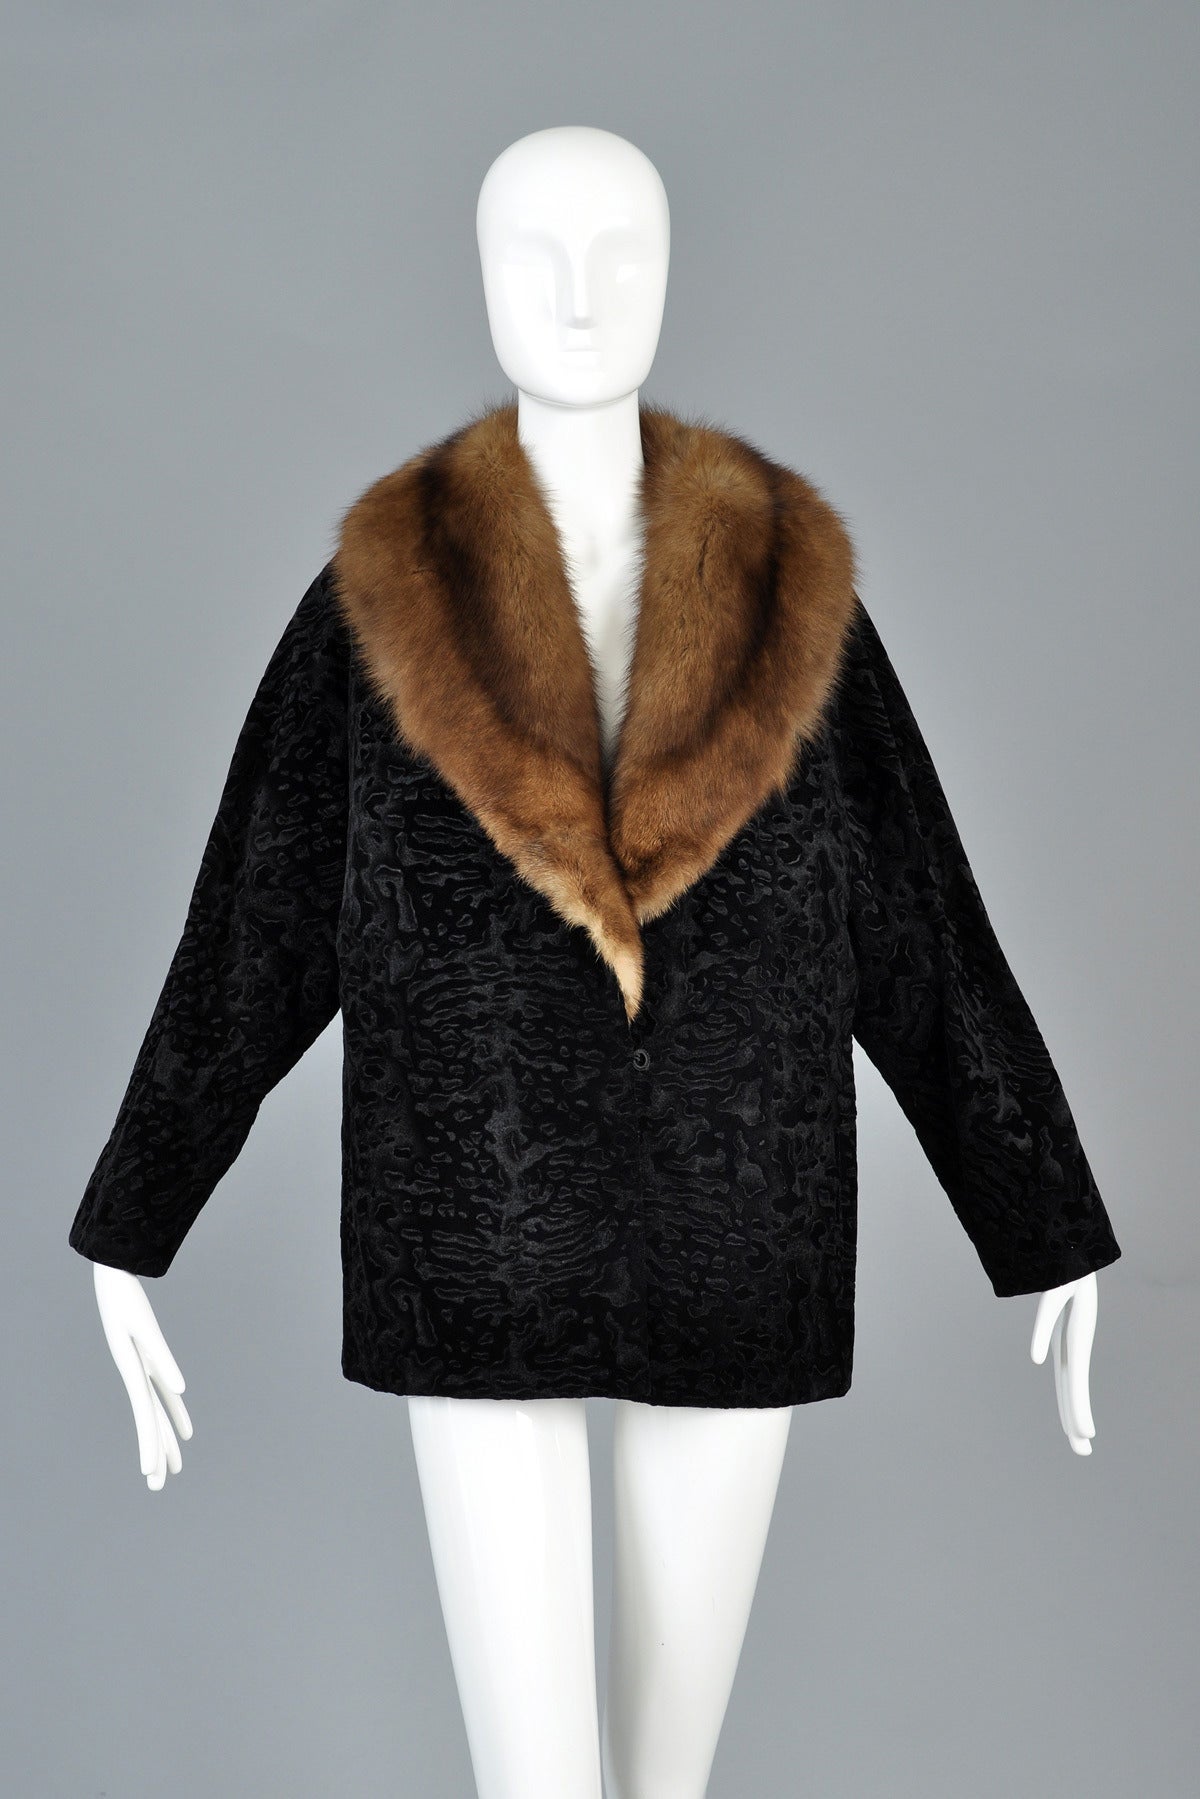 Seriously killer 1980s Bill Blass velvet and sable jacket. We can't get over the amazing flocked velvet on this piece! When we first found it, we had assumed (incorrectly) that it was broadtail or persian lamb. Broadtail lamb is a member of the